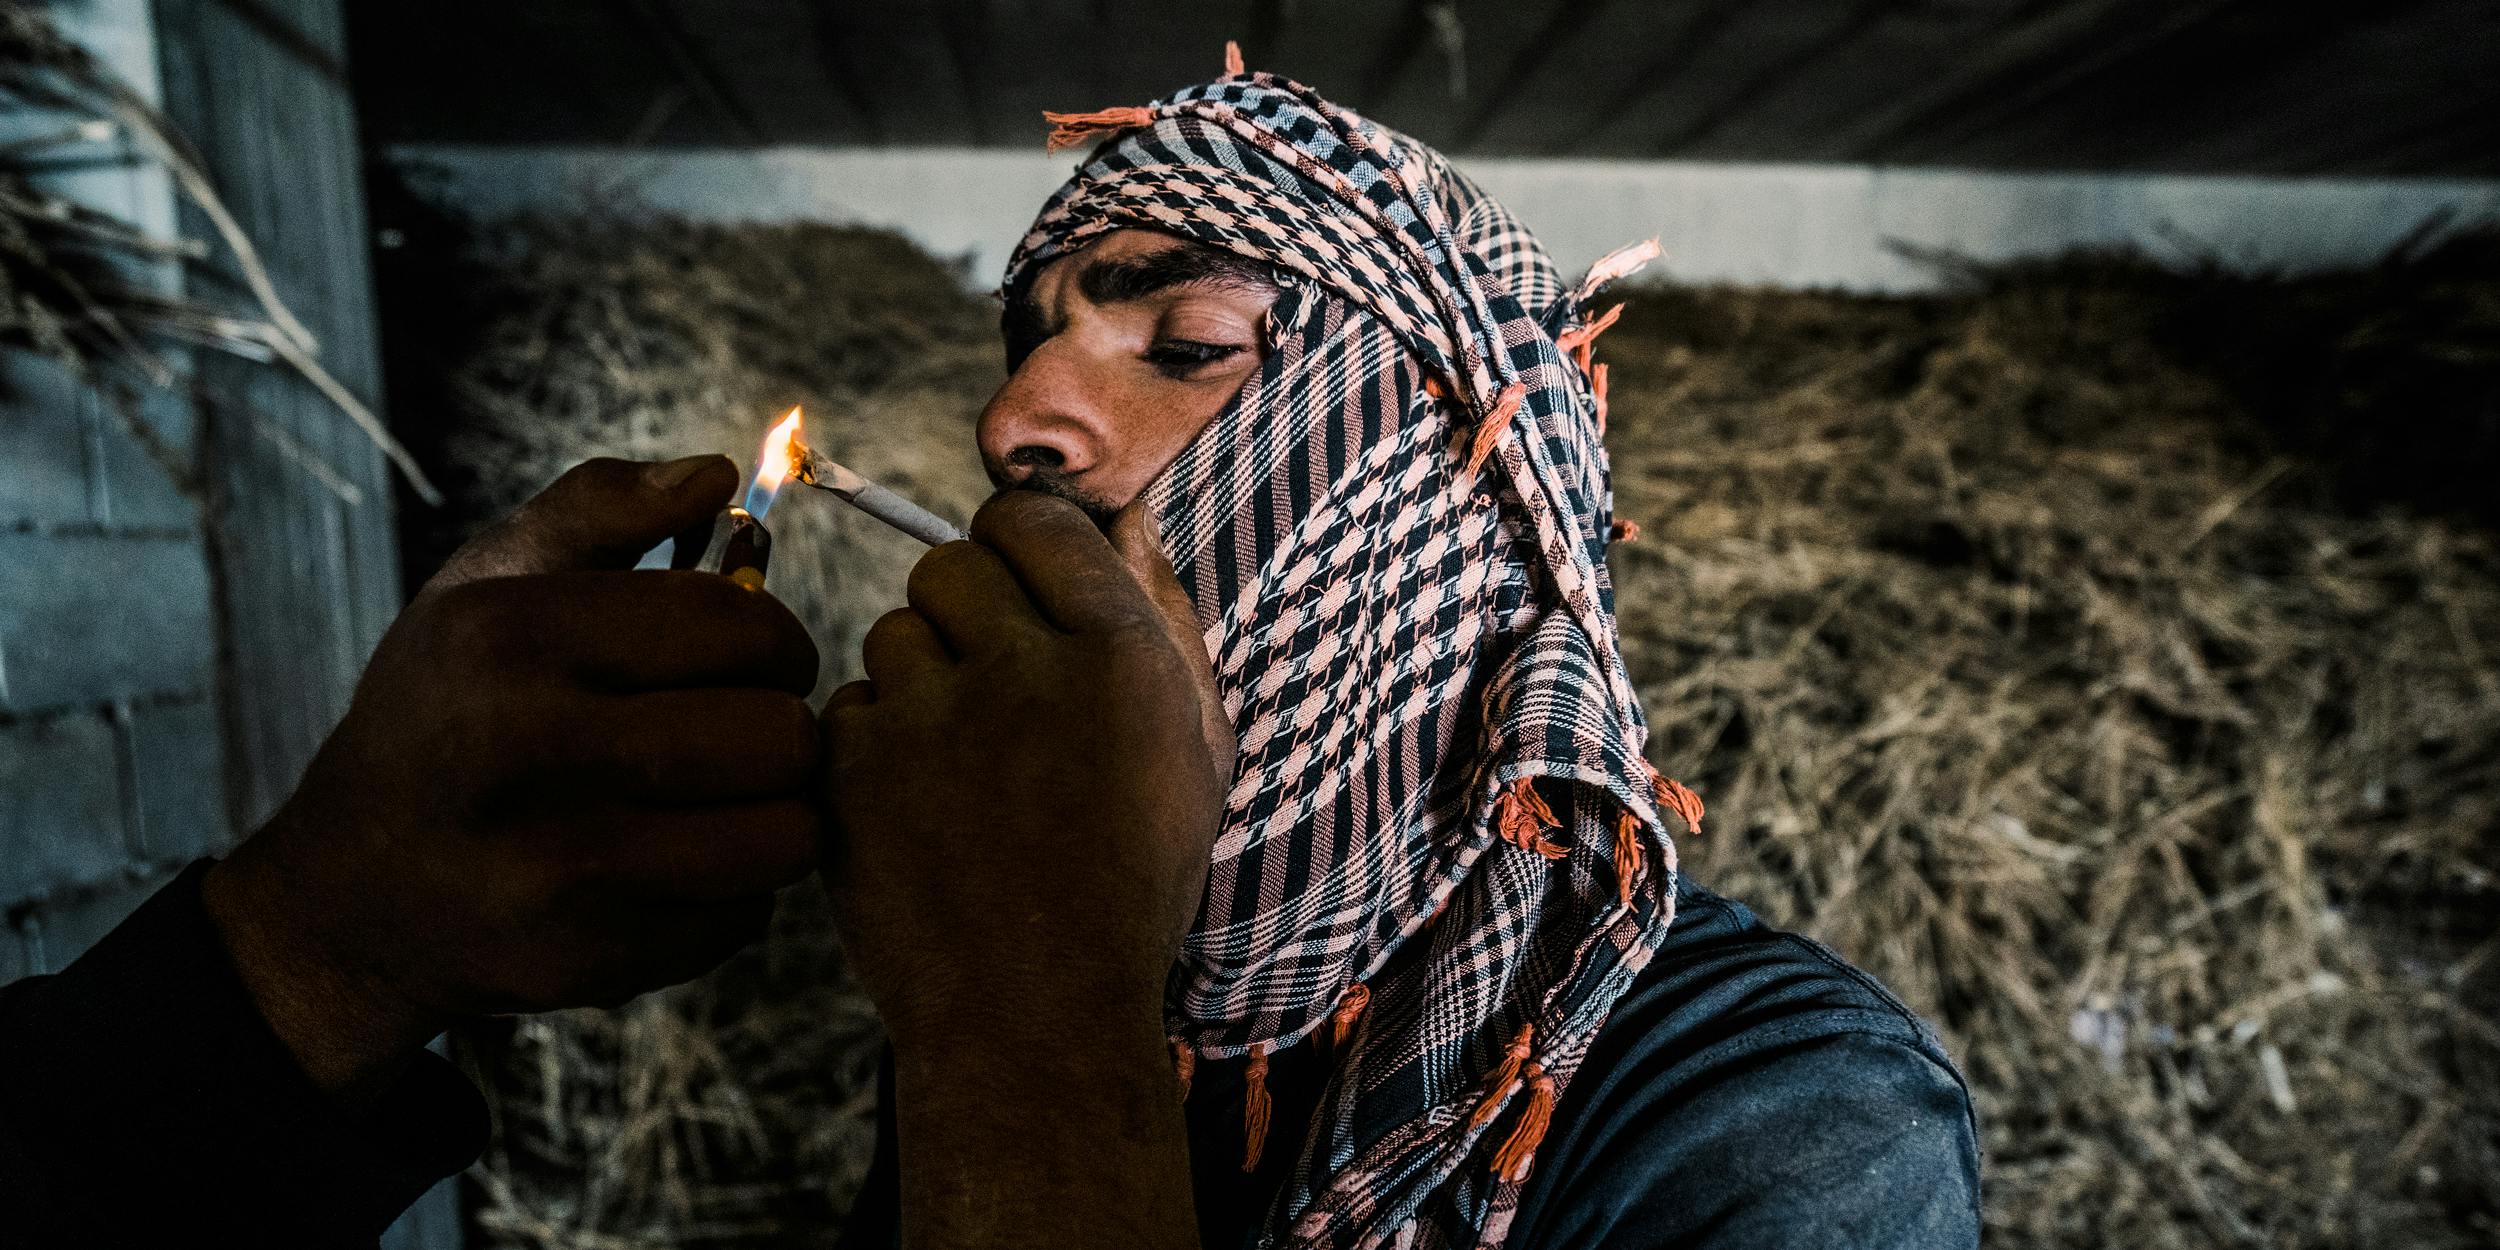 Is Cannabis Legalization Possible Anywhere In The Middle East?